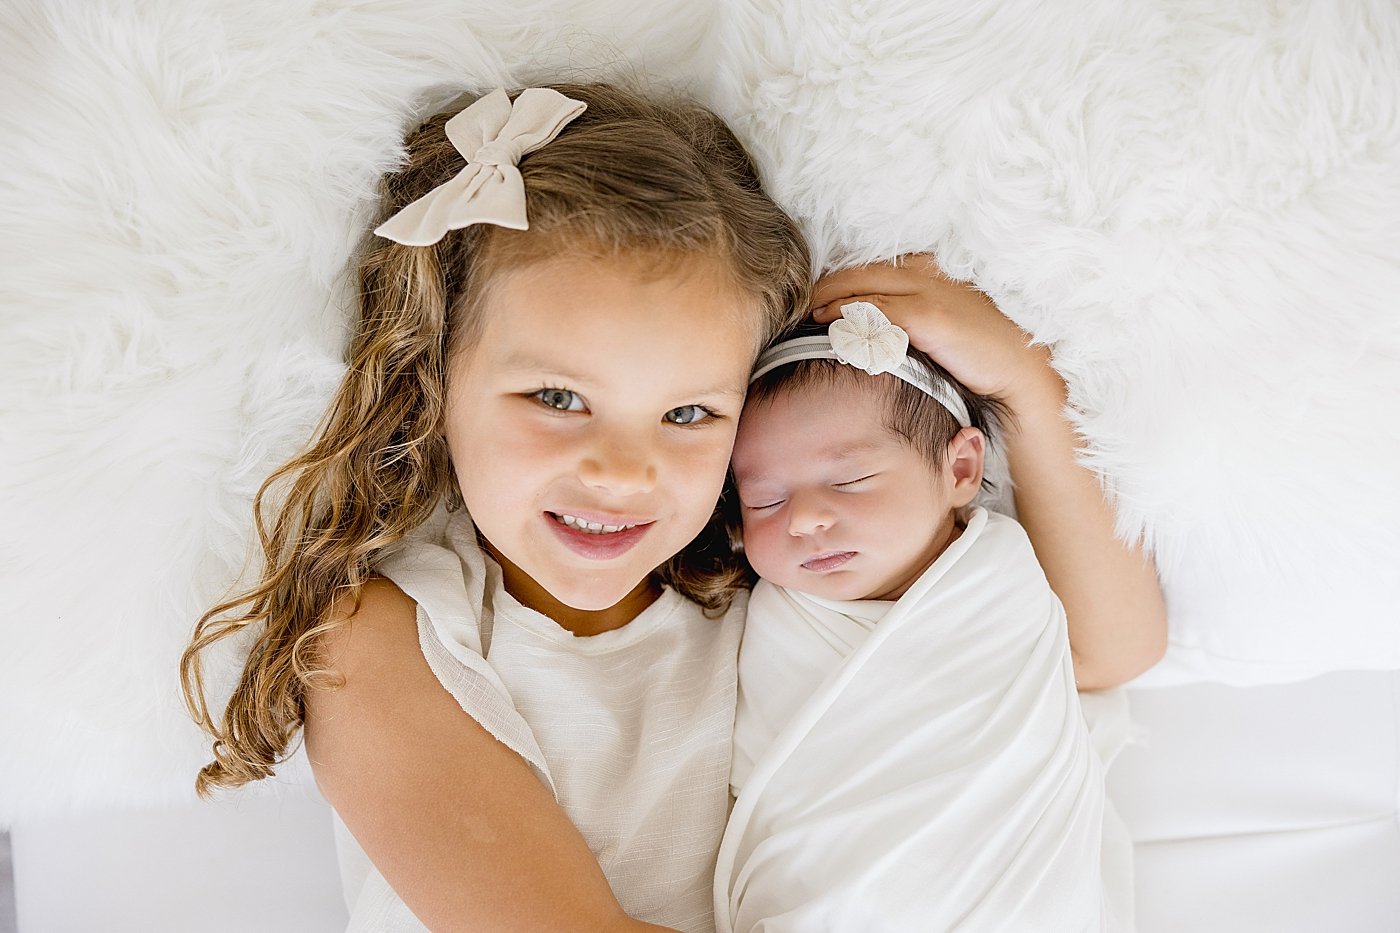 Big Sister with Baby Girl in Newborn Session | Ambre Williams Photography